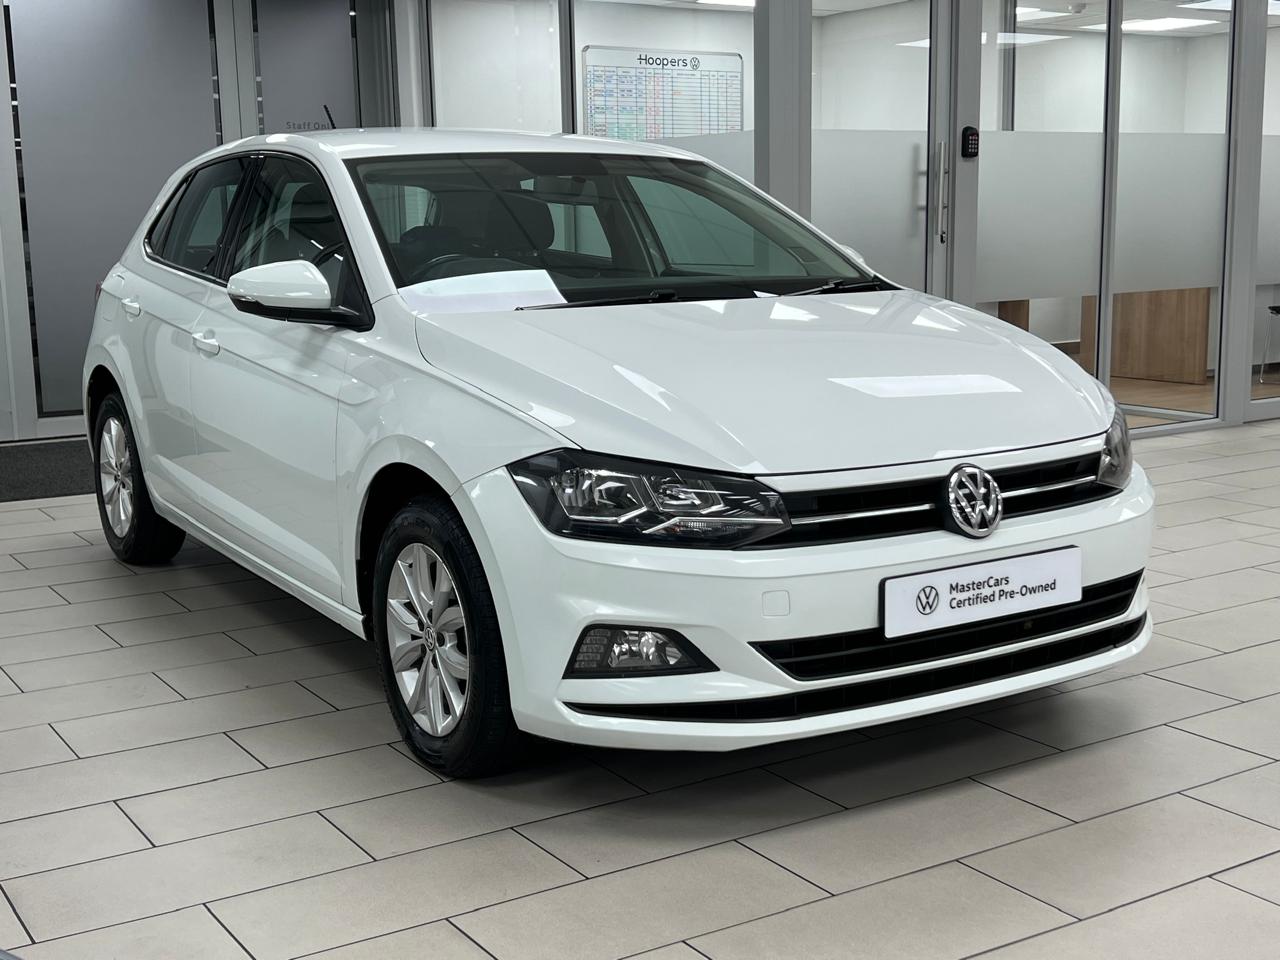 2019 Volkswagen Polo Hatch  for sale - 10102